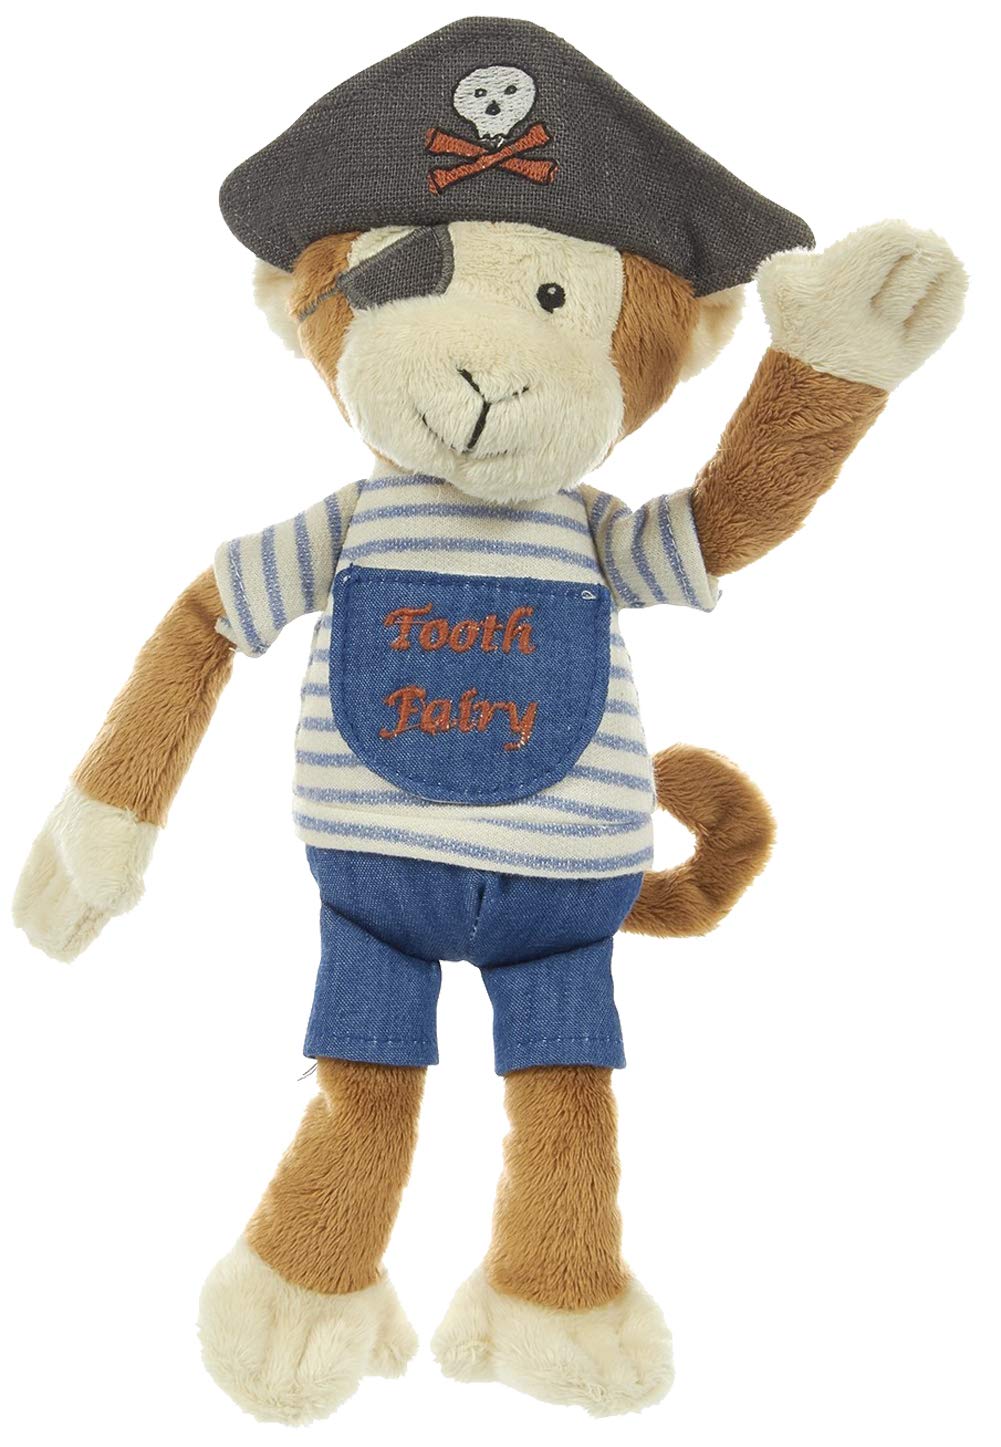 pete the pirate monkey tooth fairy plush animal on a white background